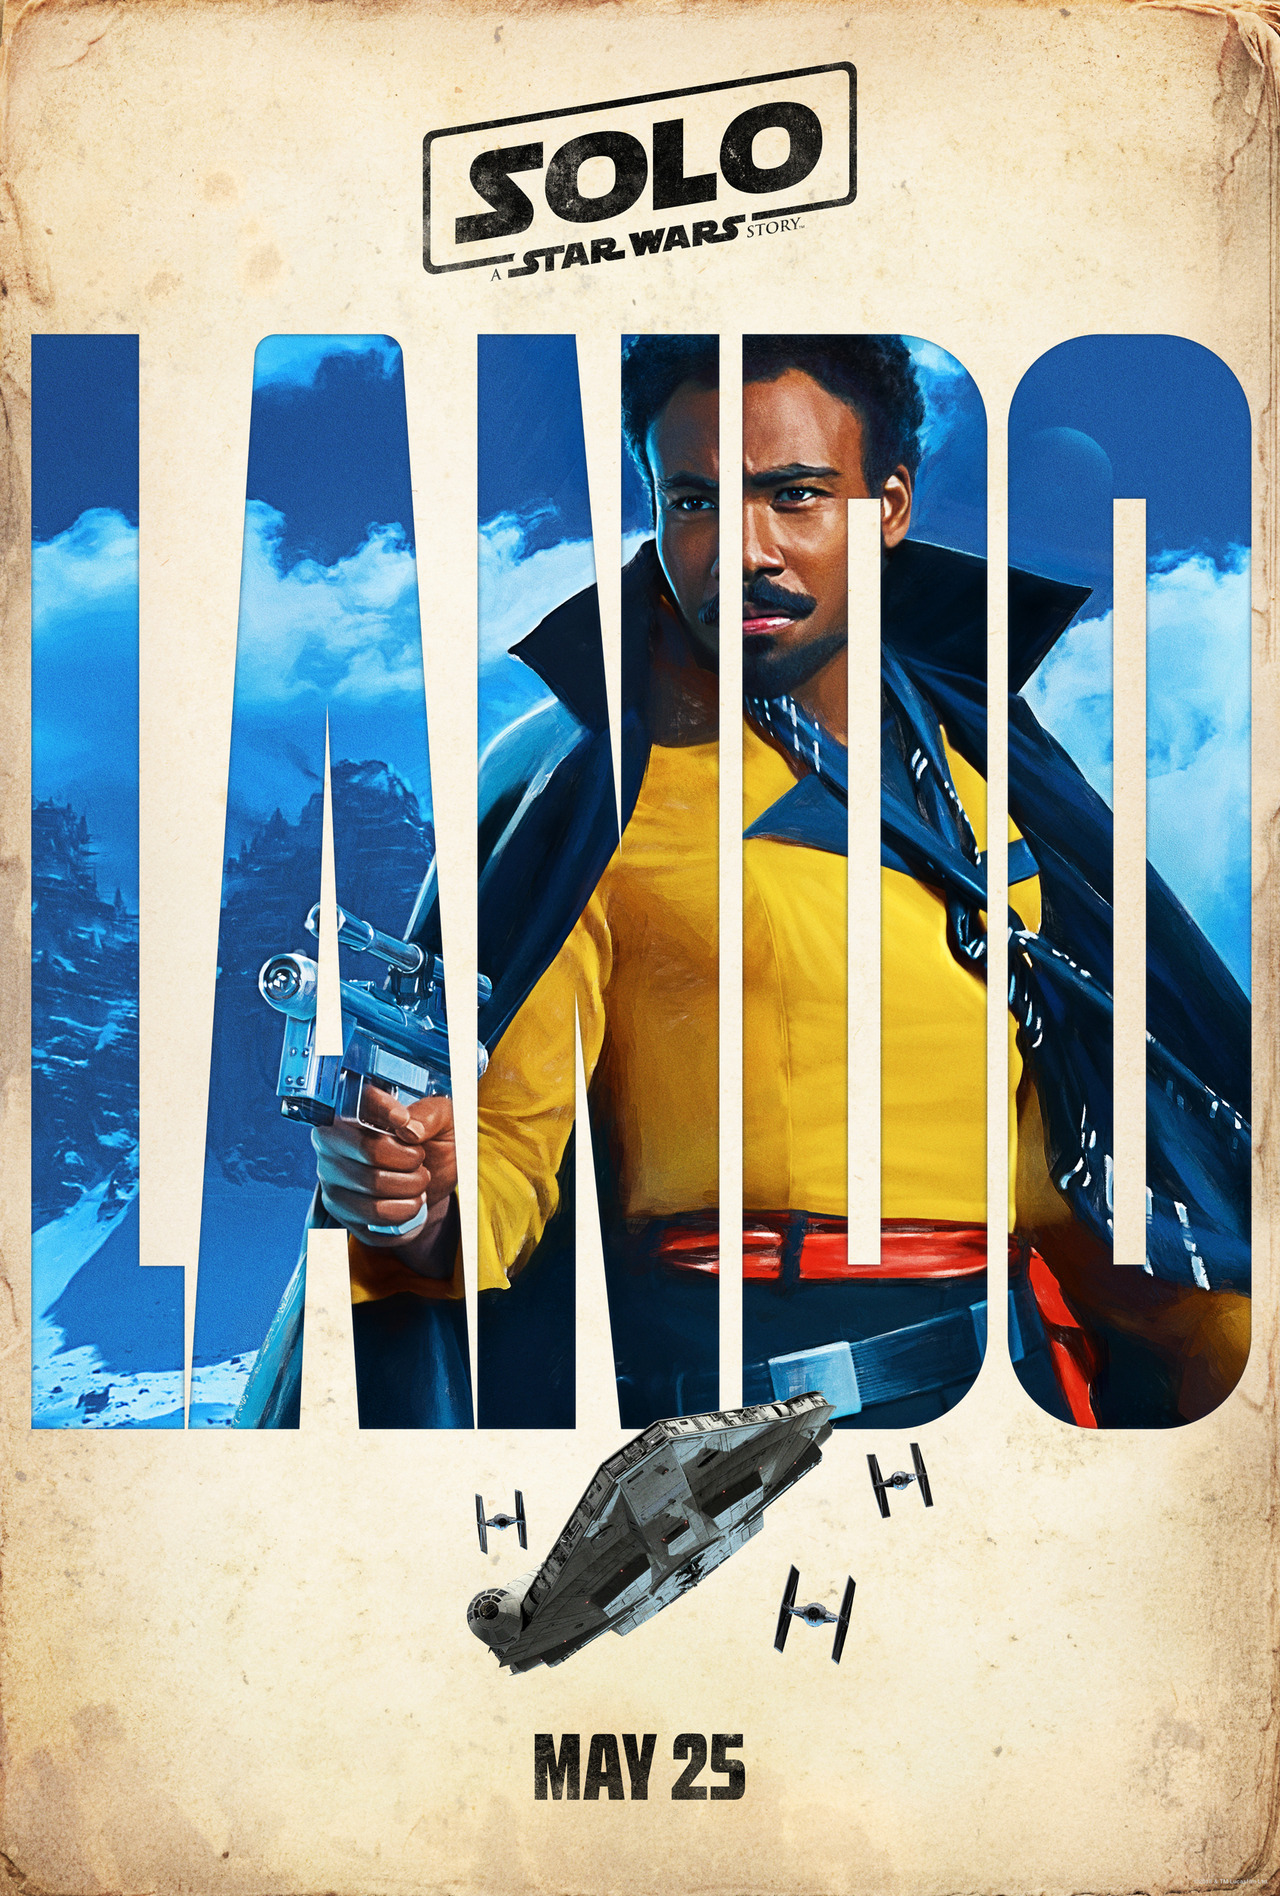 starwars:Check out the four new teaser posters featuring Solo, Lando, Qi’ra, and